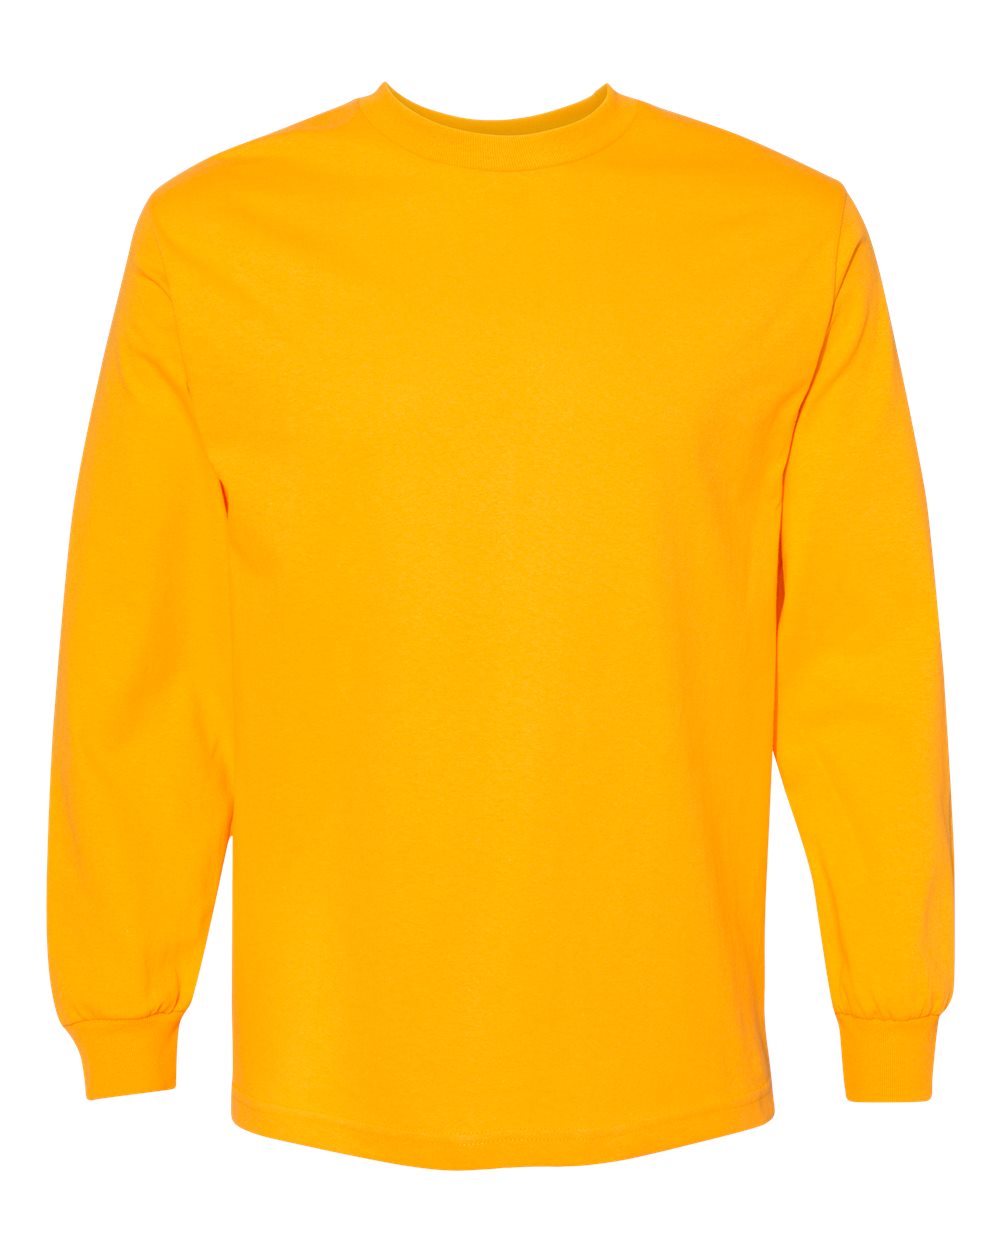 American Apparel Unisex Heavyweight Cotton Long Sleeve Tee 1304 #color_Gold